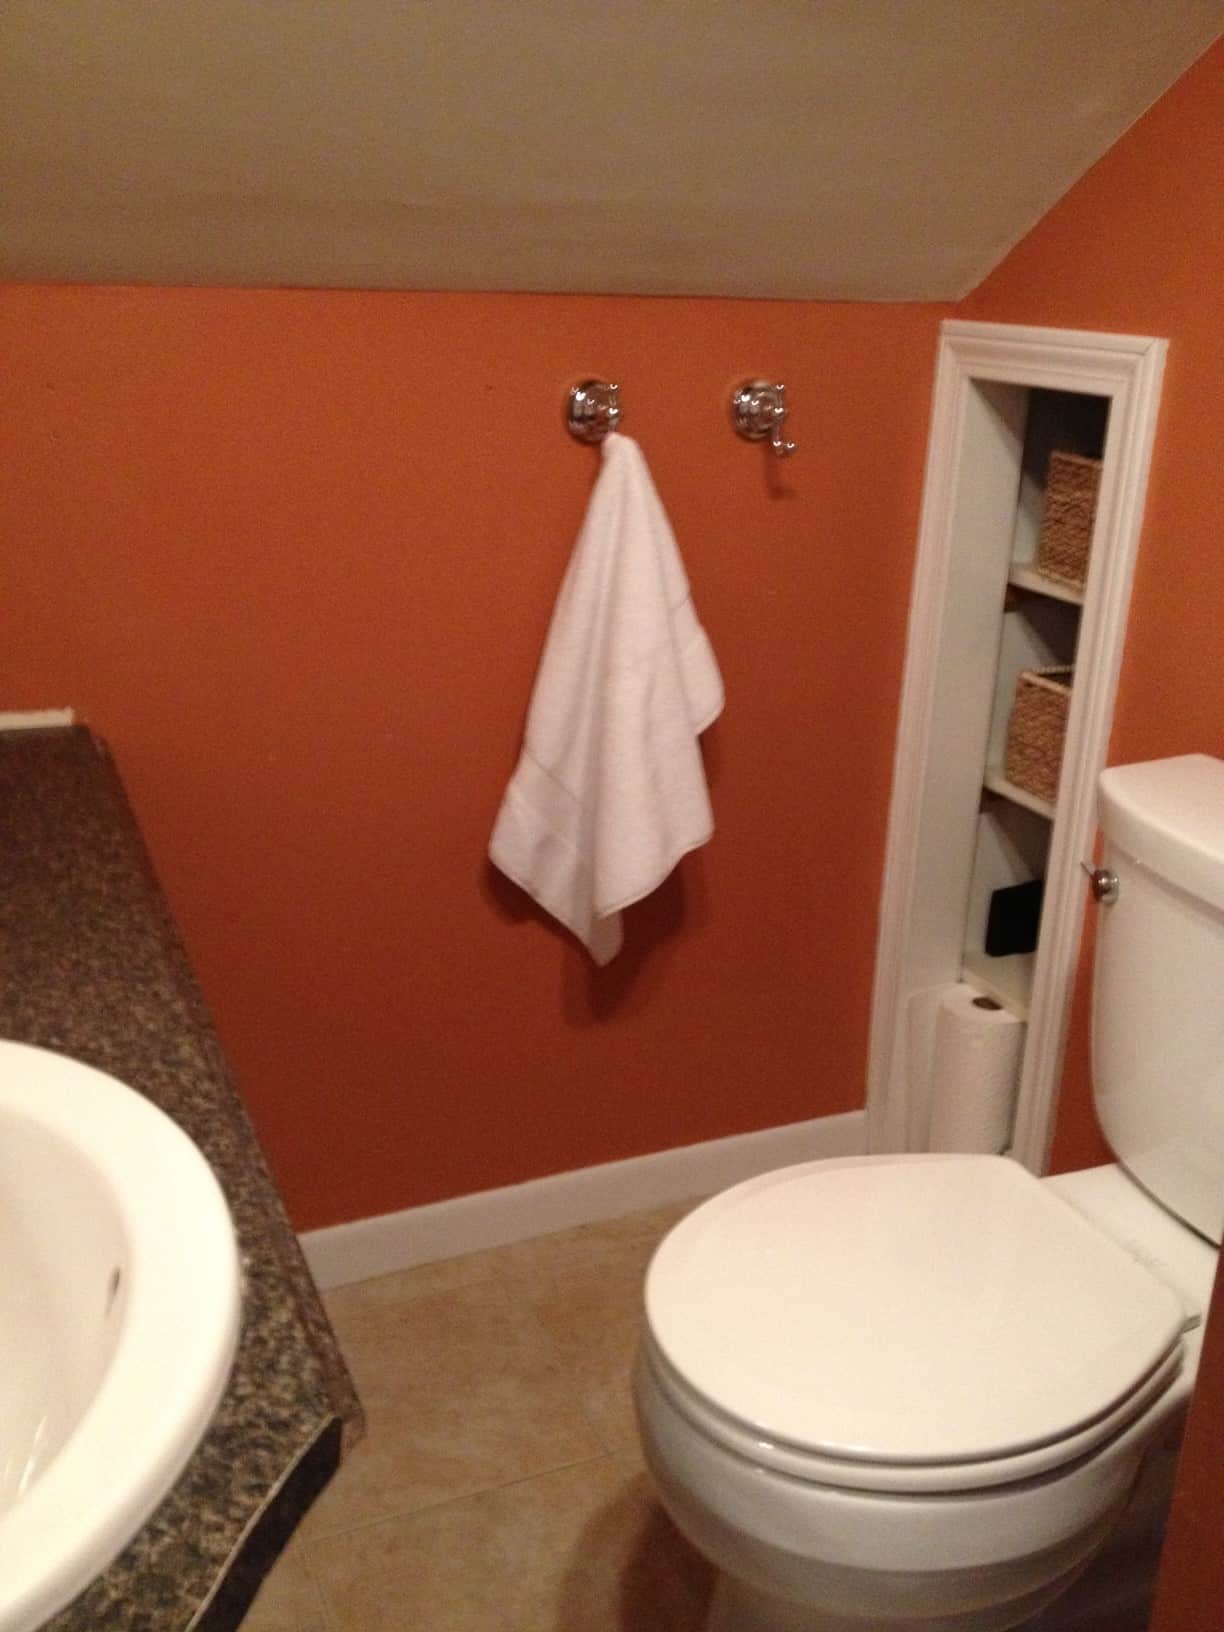 A bathroom with orange painted walls, silver hooks for towels, a recessed shelf for supplies and a sink and toilet nearby